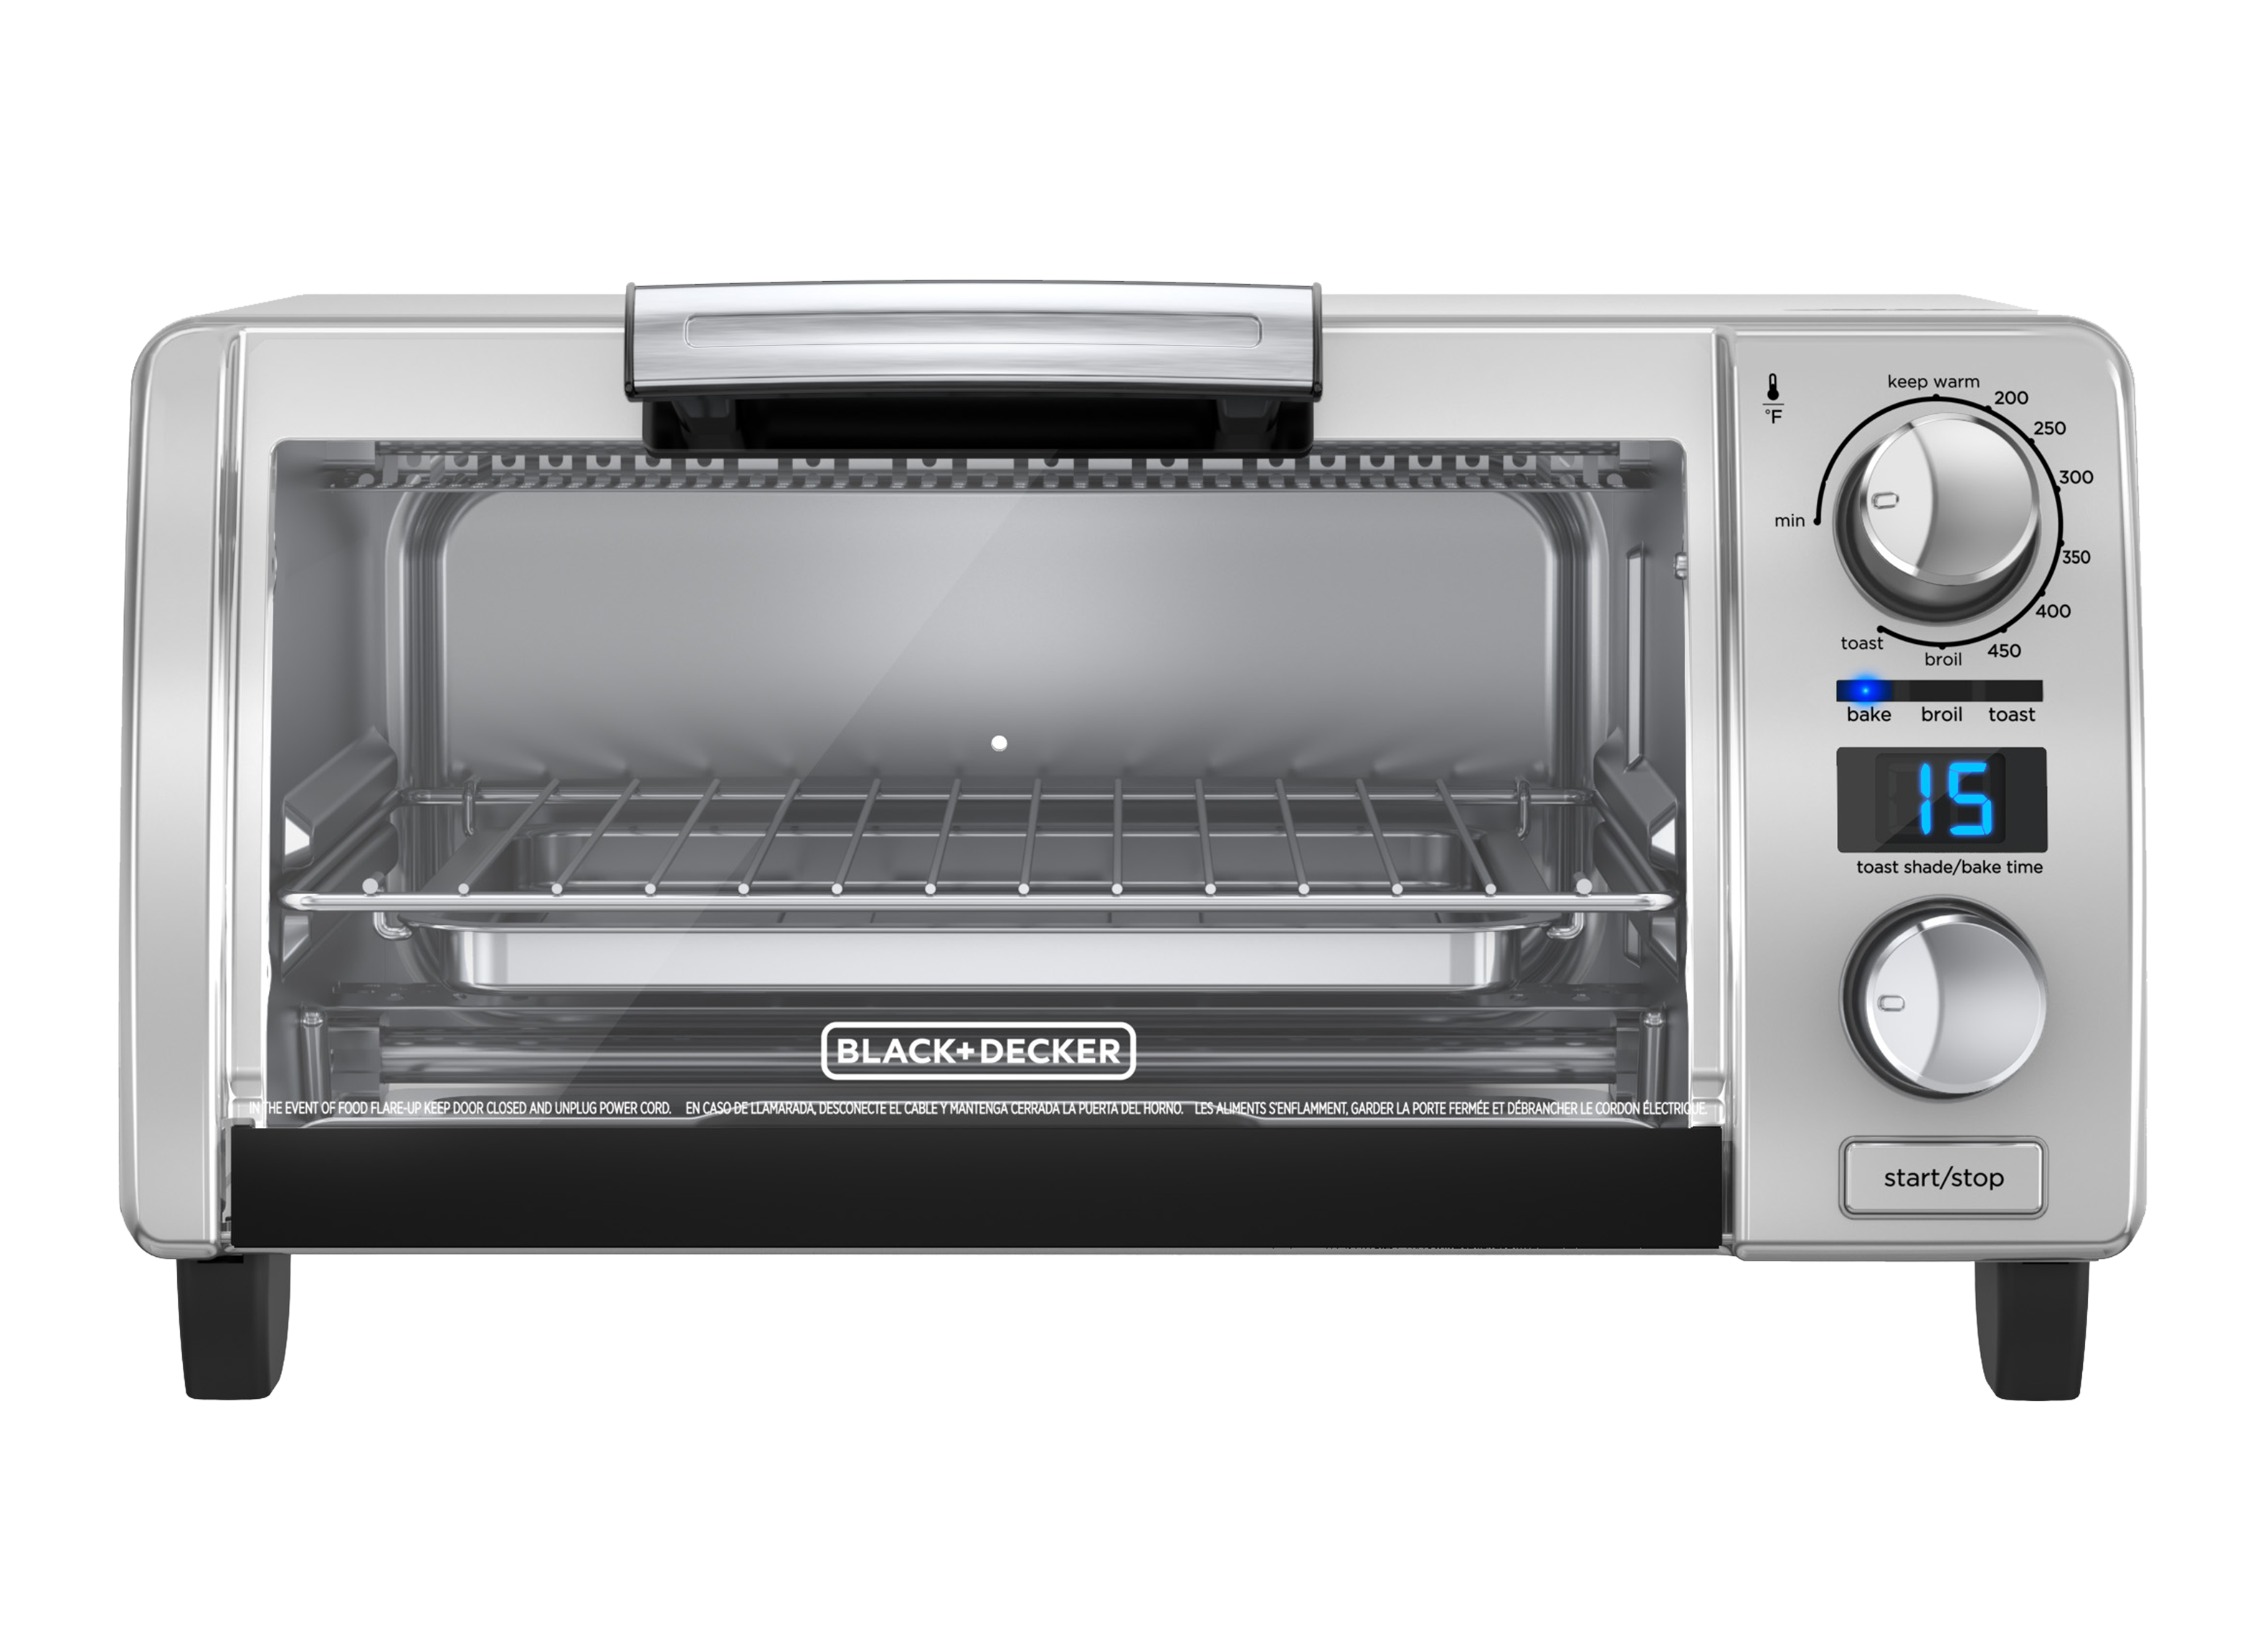 https://crdms.images.consumerreports.org/prod/products/cr/models/395995-toaster-ovens-black-decker-tod1770g-4-slice-convection-digital-62091.png